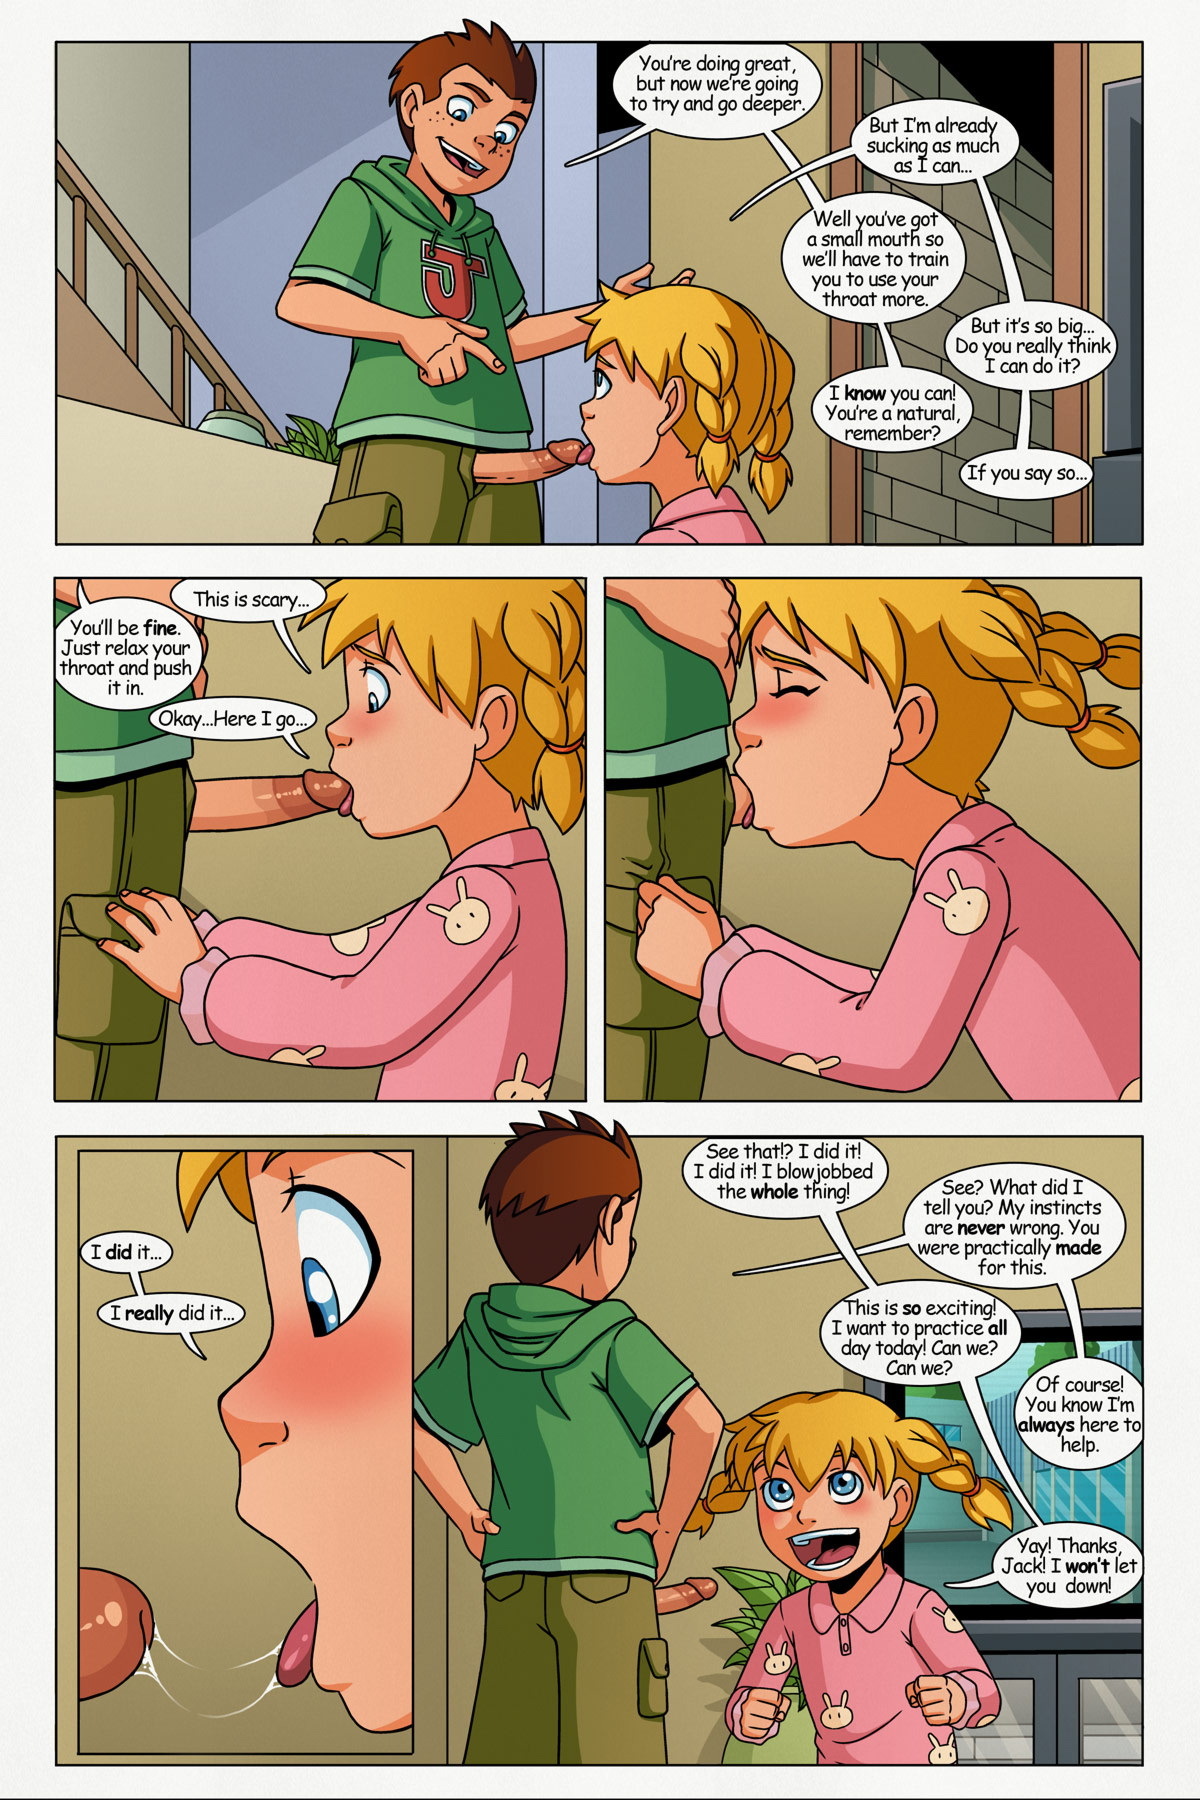 Katie's Training - Page 2